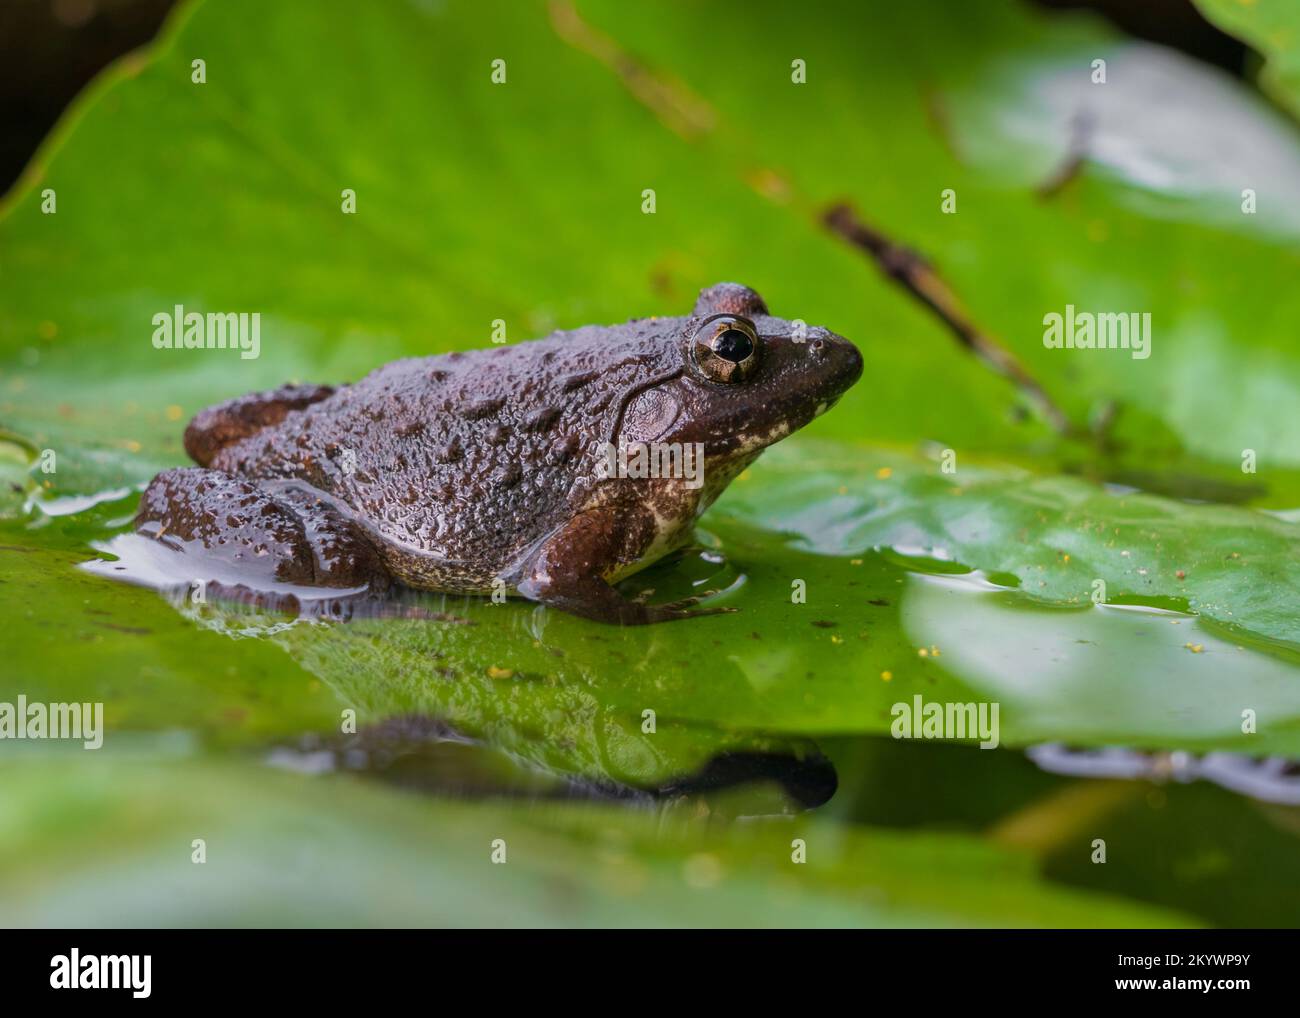 Closeup view of grey brown tropical frog with warts squatting on bright green water lily pad during rainy season in northern Thailand Stock Photo